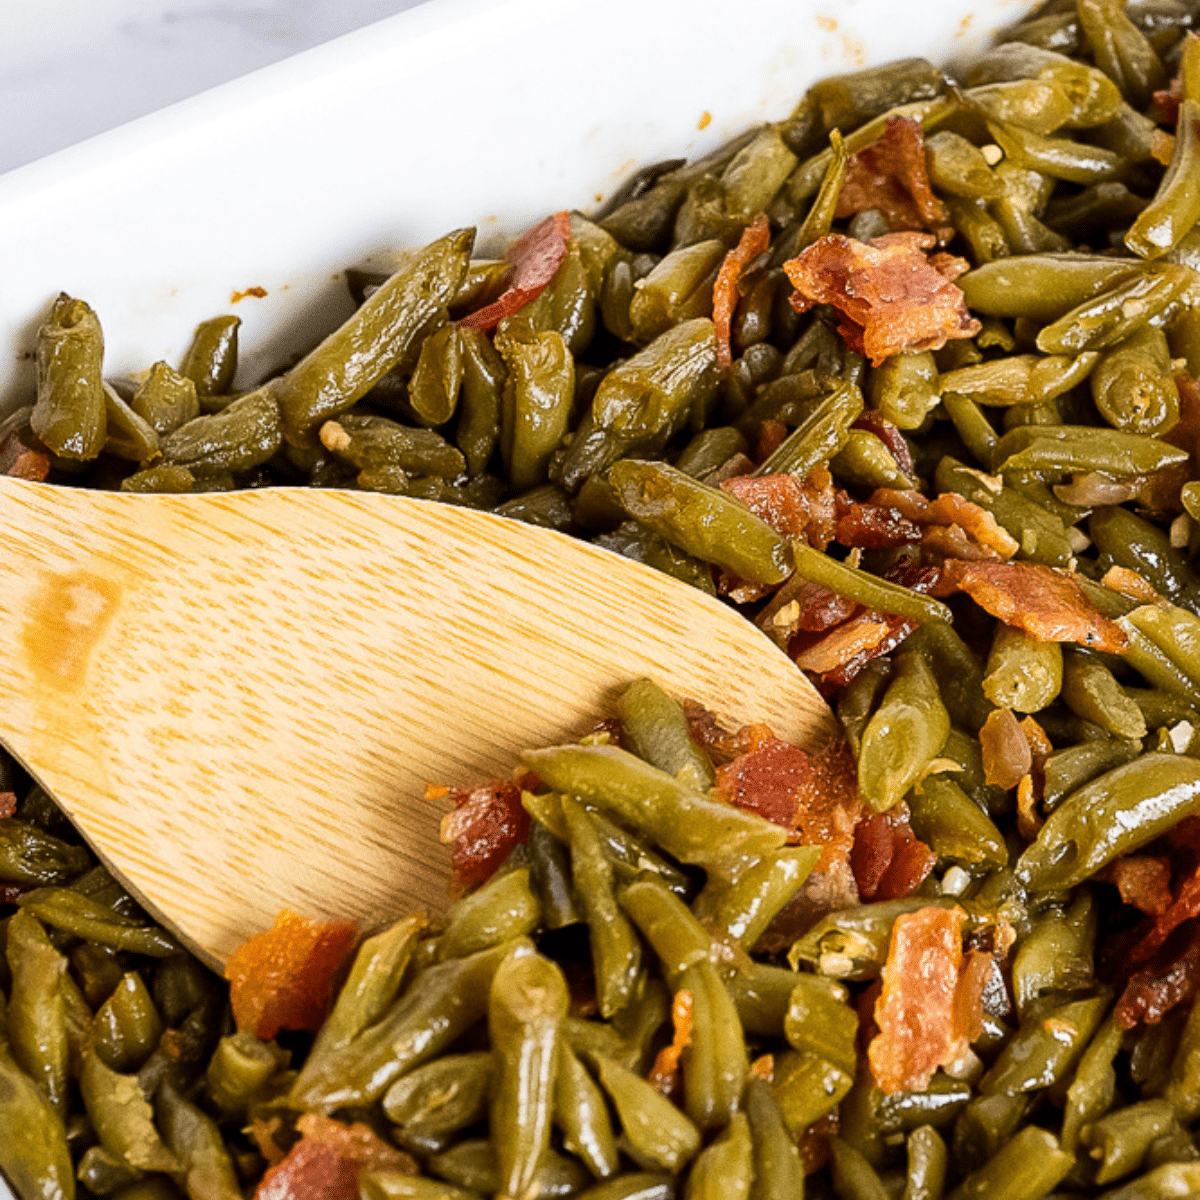 Stirring the fully baked crack green beans casserole with a wooden spoon, showcasing the irresistible texture and perfect consistency of the dish.